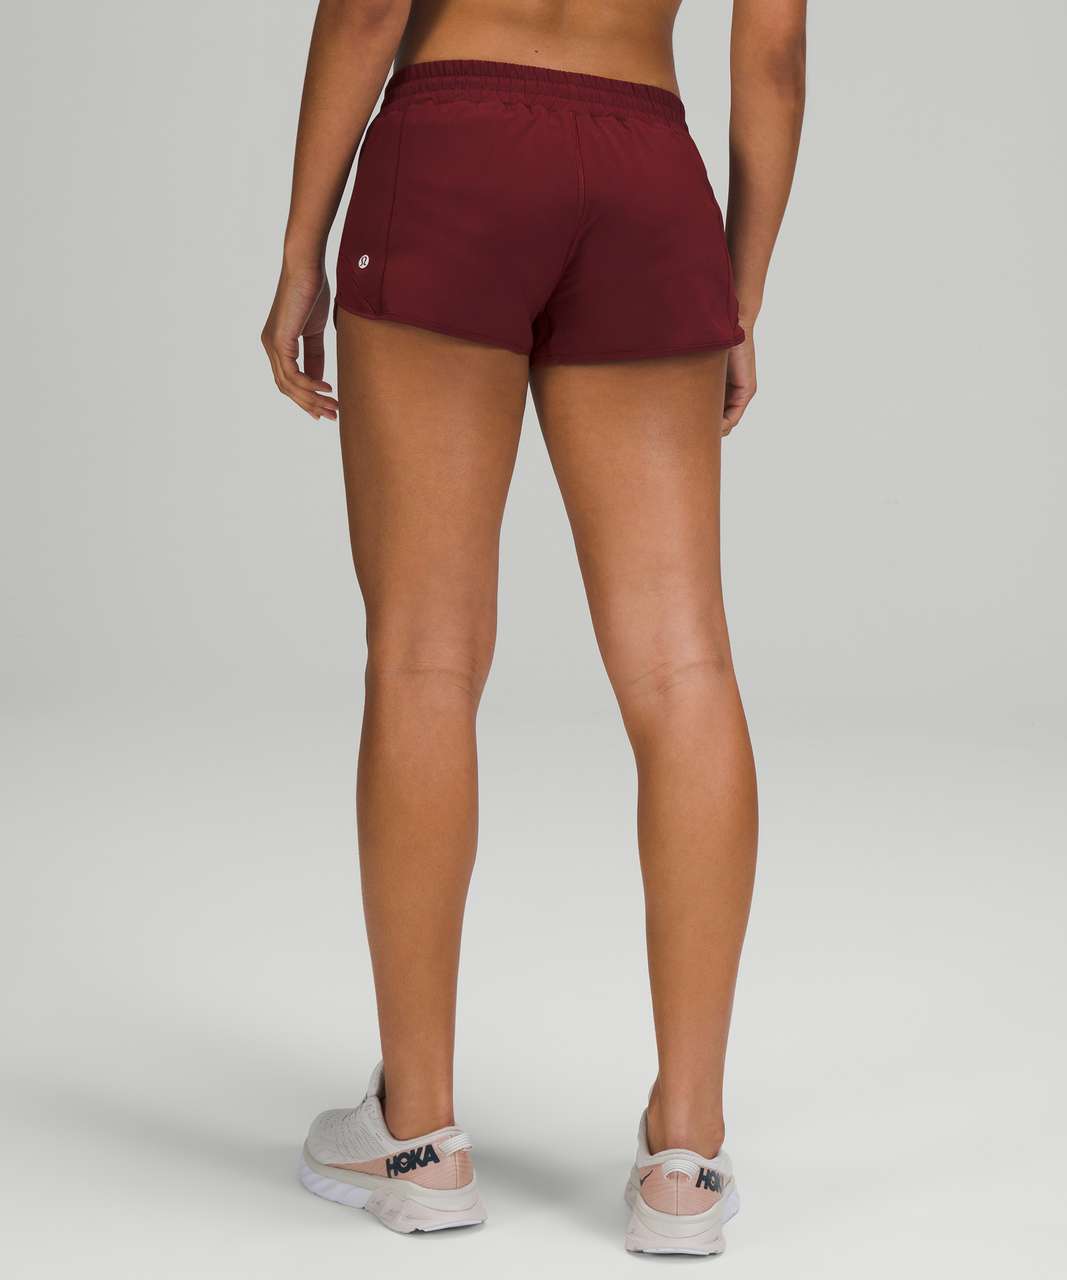 Try-On Reviews: Hotty Hot Shorts + All Sport Crops + Straight Up